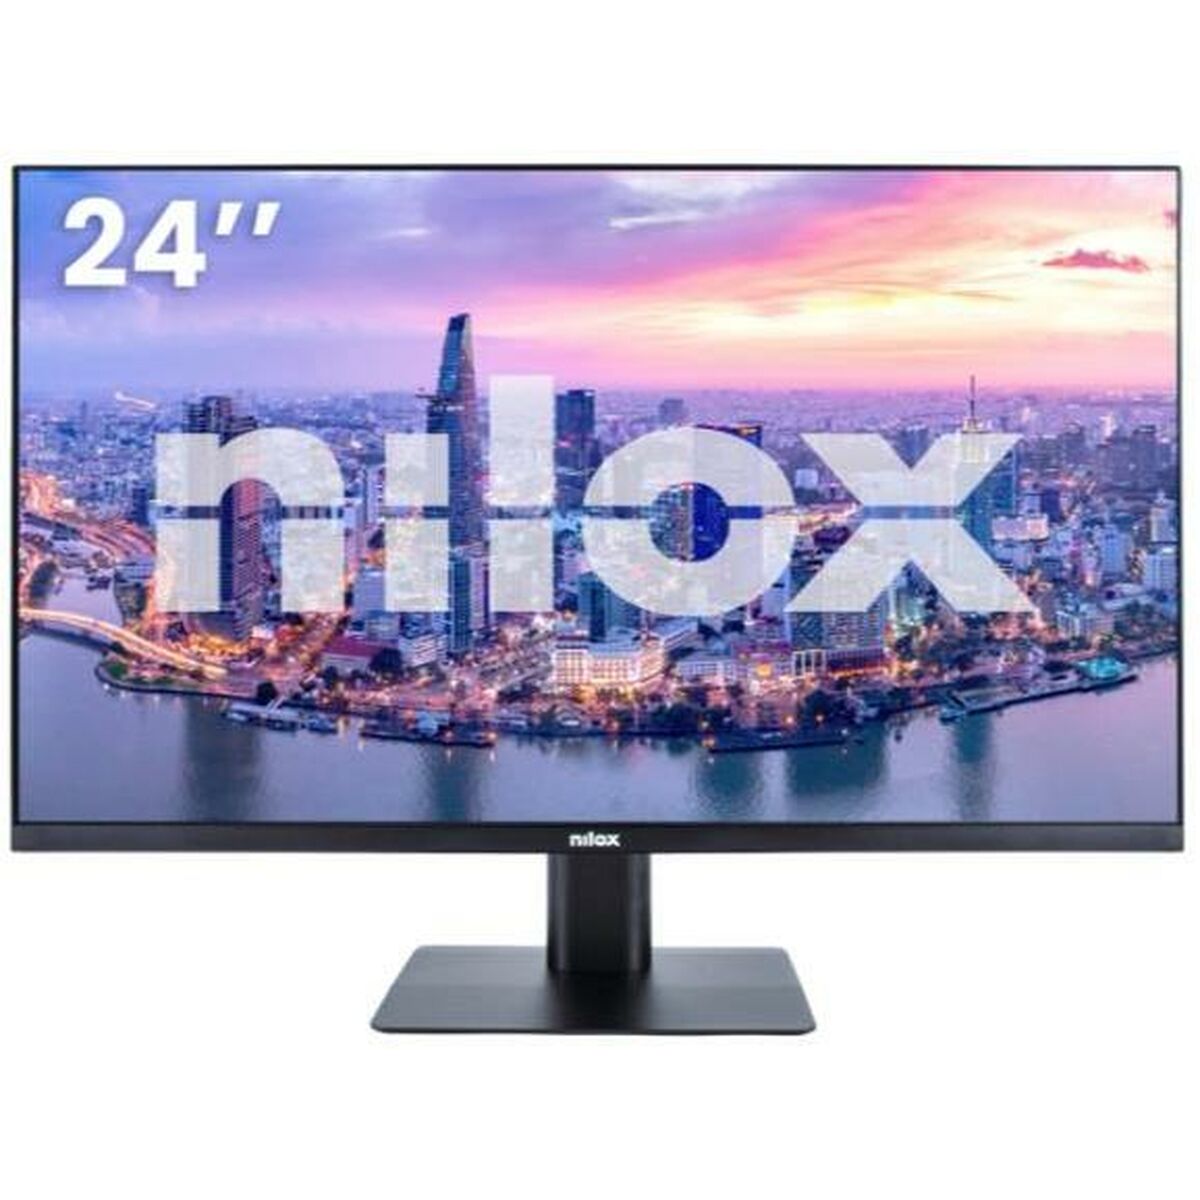 Monitor Nilox NXMM24FHD112 23,8", Nilox, Computing, monitor-nilox-nxmm24fhd112-23-8, Brand_Nilox, category-reference-2609, category-reference-2642, category-reference-2644, category-reference-t-19685, category-reference-t-19902, computers / peripherals, Condition_NEW, office, Price_100 - 200, Teleworking, RiotNook